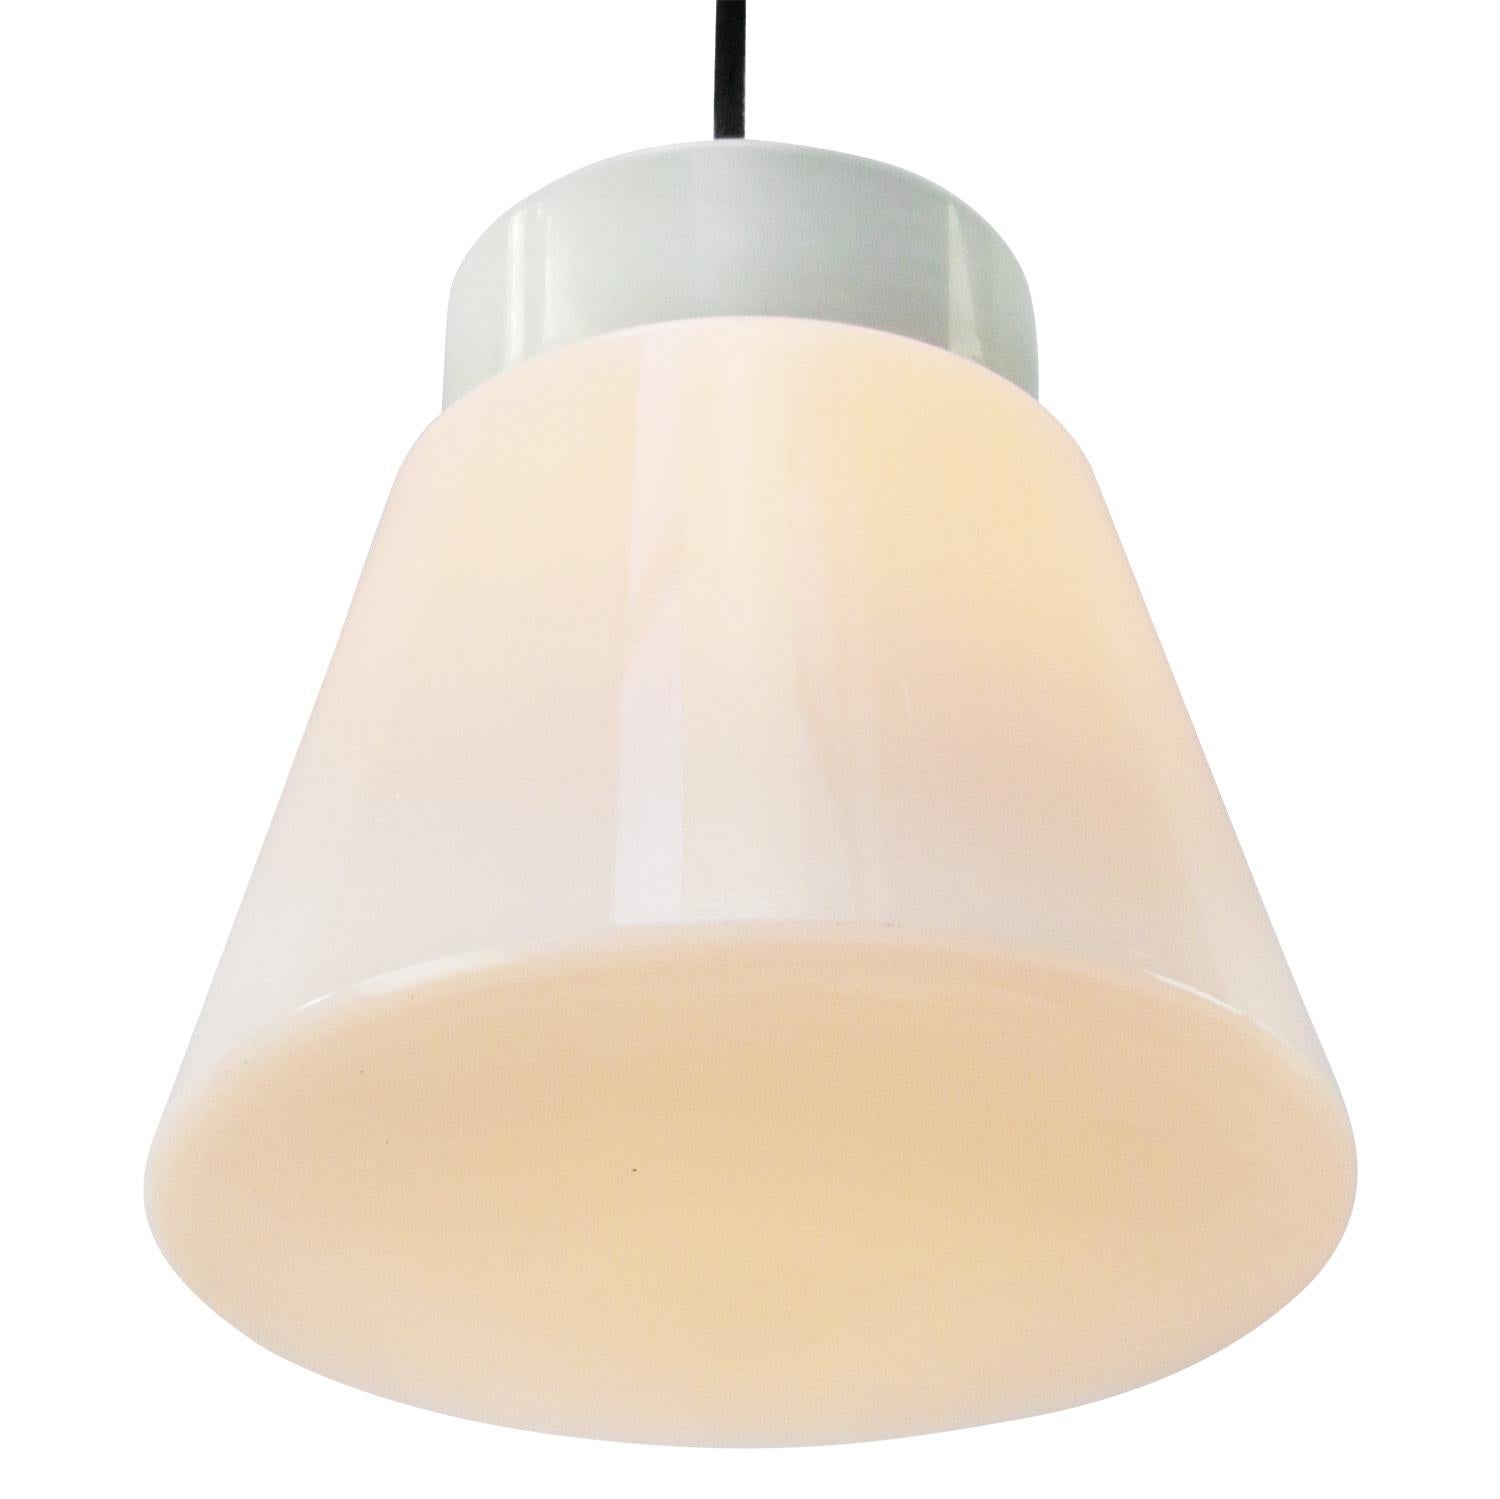 Opaline milk glass pendant.
2 meter black wire

Weight: 1.50 kg / 3.3 lb

Priced per individual item. All lamps have been made suitable by international standards for incandescent light bulbs, energy-efficient and LED bulbs. E26/E27 bulb